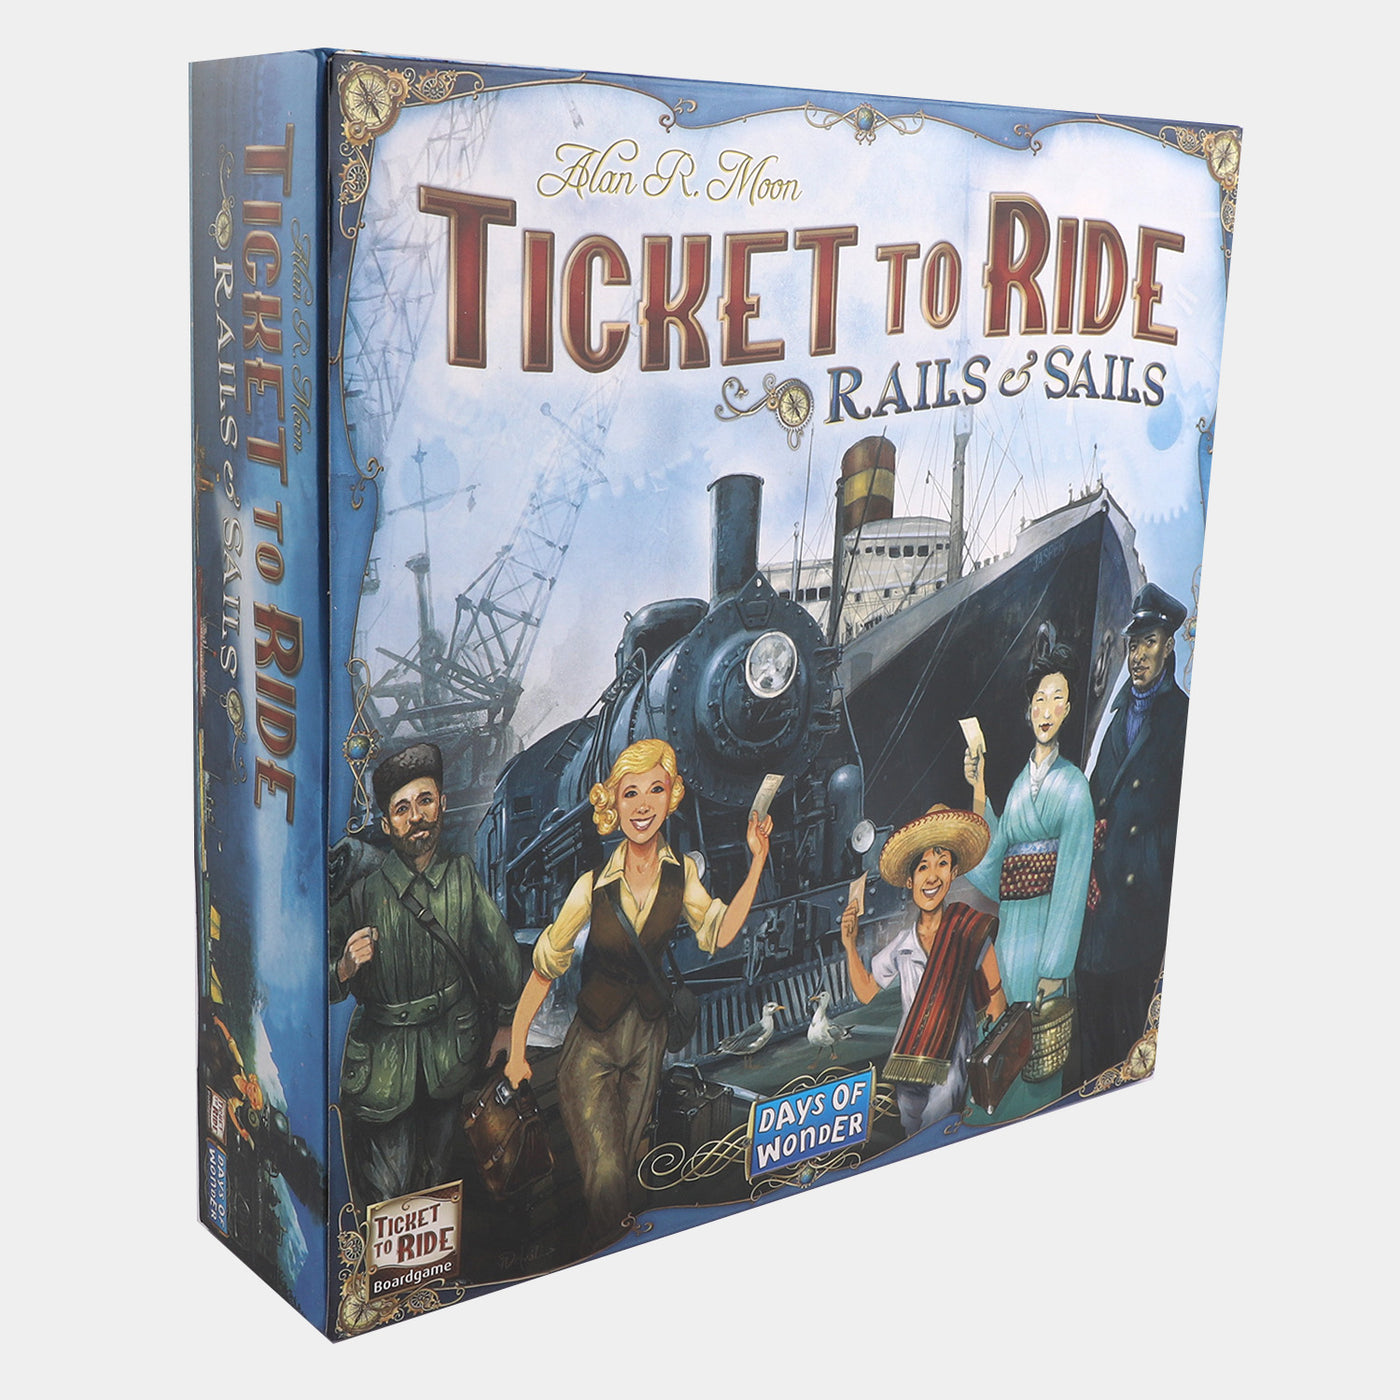 Ticket to Ride Train Route-Building Strategy Board Game